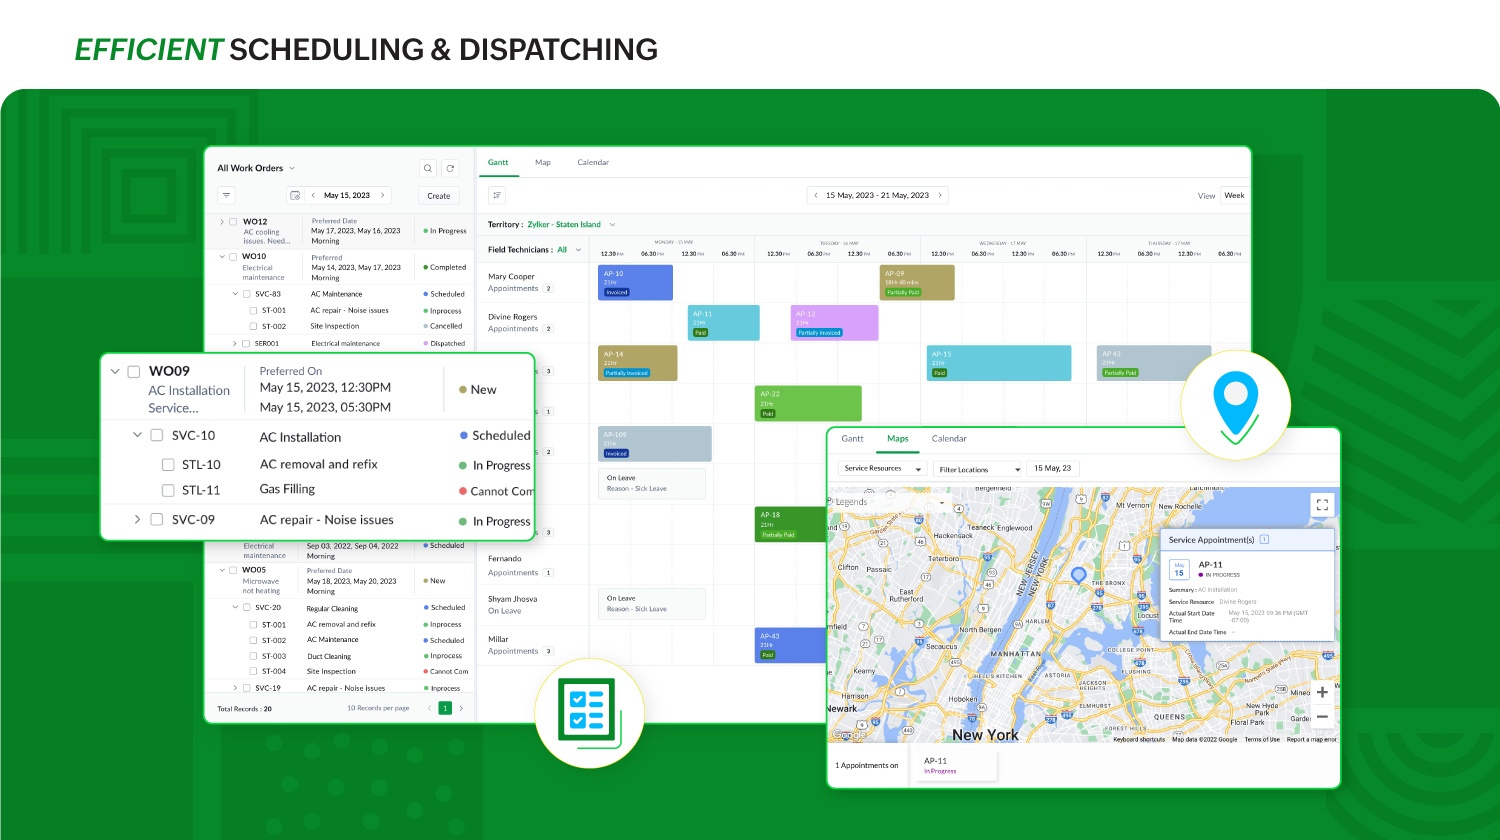 The Dispatch Console lets you schedule work orders, services or service tasks to various field agents. The map view helps in choosing agents based on live location and proximity. The Gantt and calendar also shows holidays and time-offs